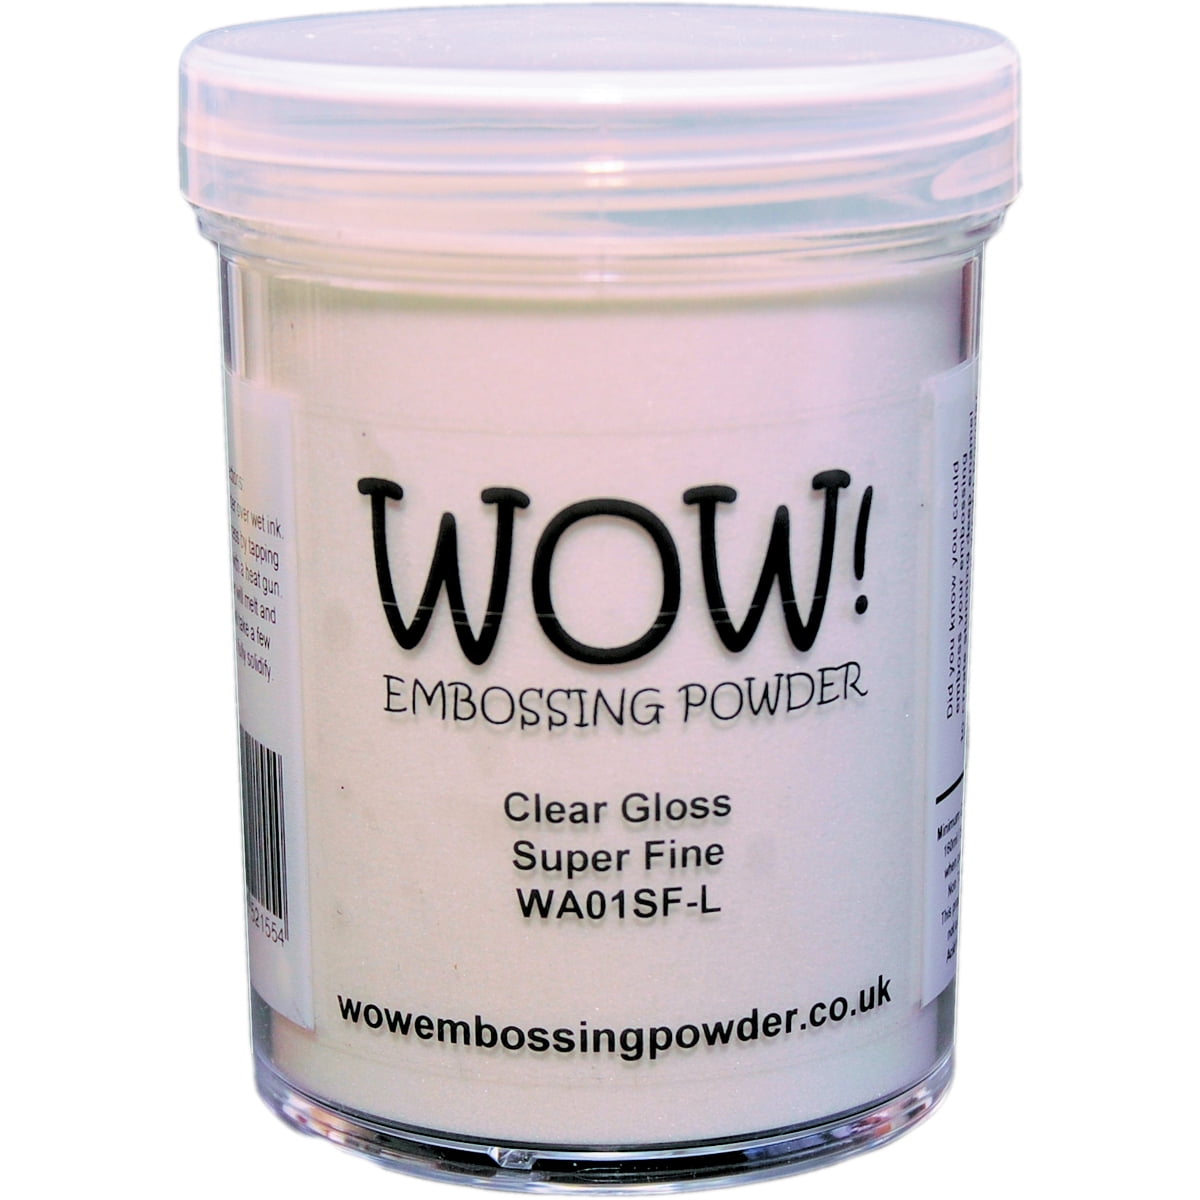 Super Fine Clear Gloss Embossing Powder by WOW – Catherine Pooler Designs